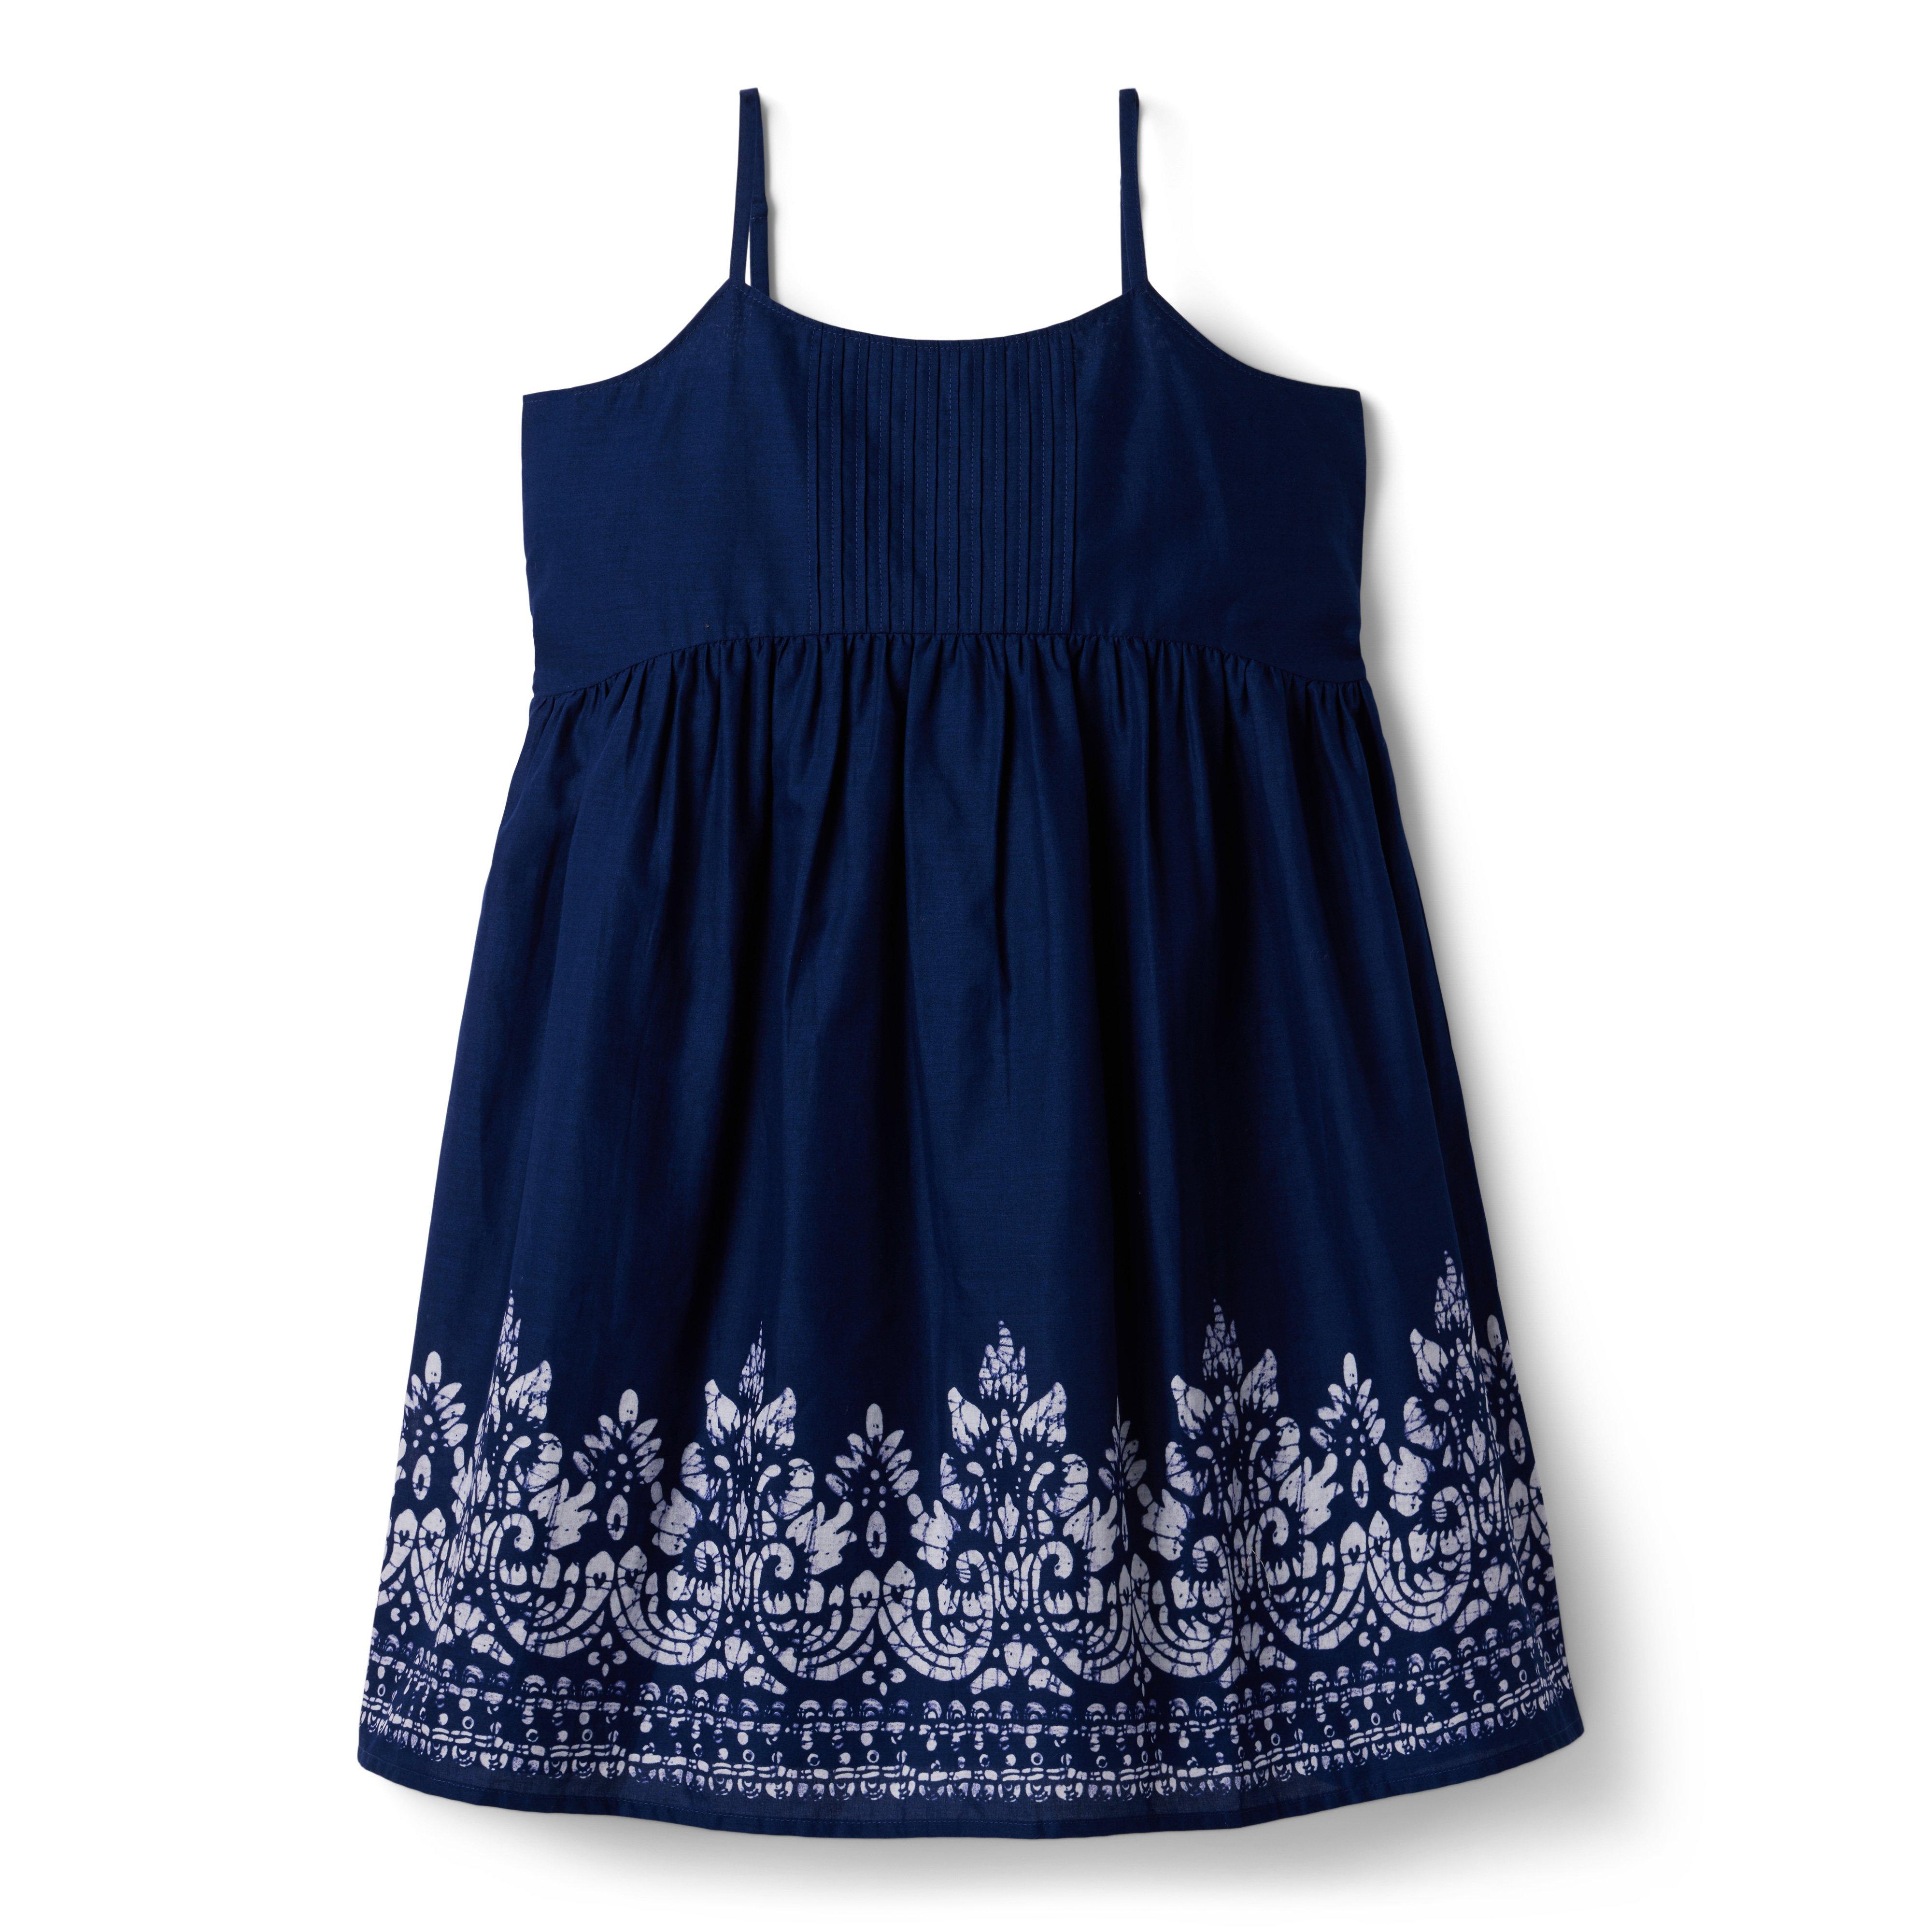 Tween Medieval Blue Border Print Sundress by Janie and Jack